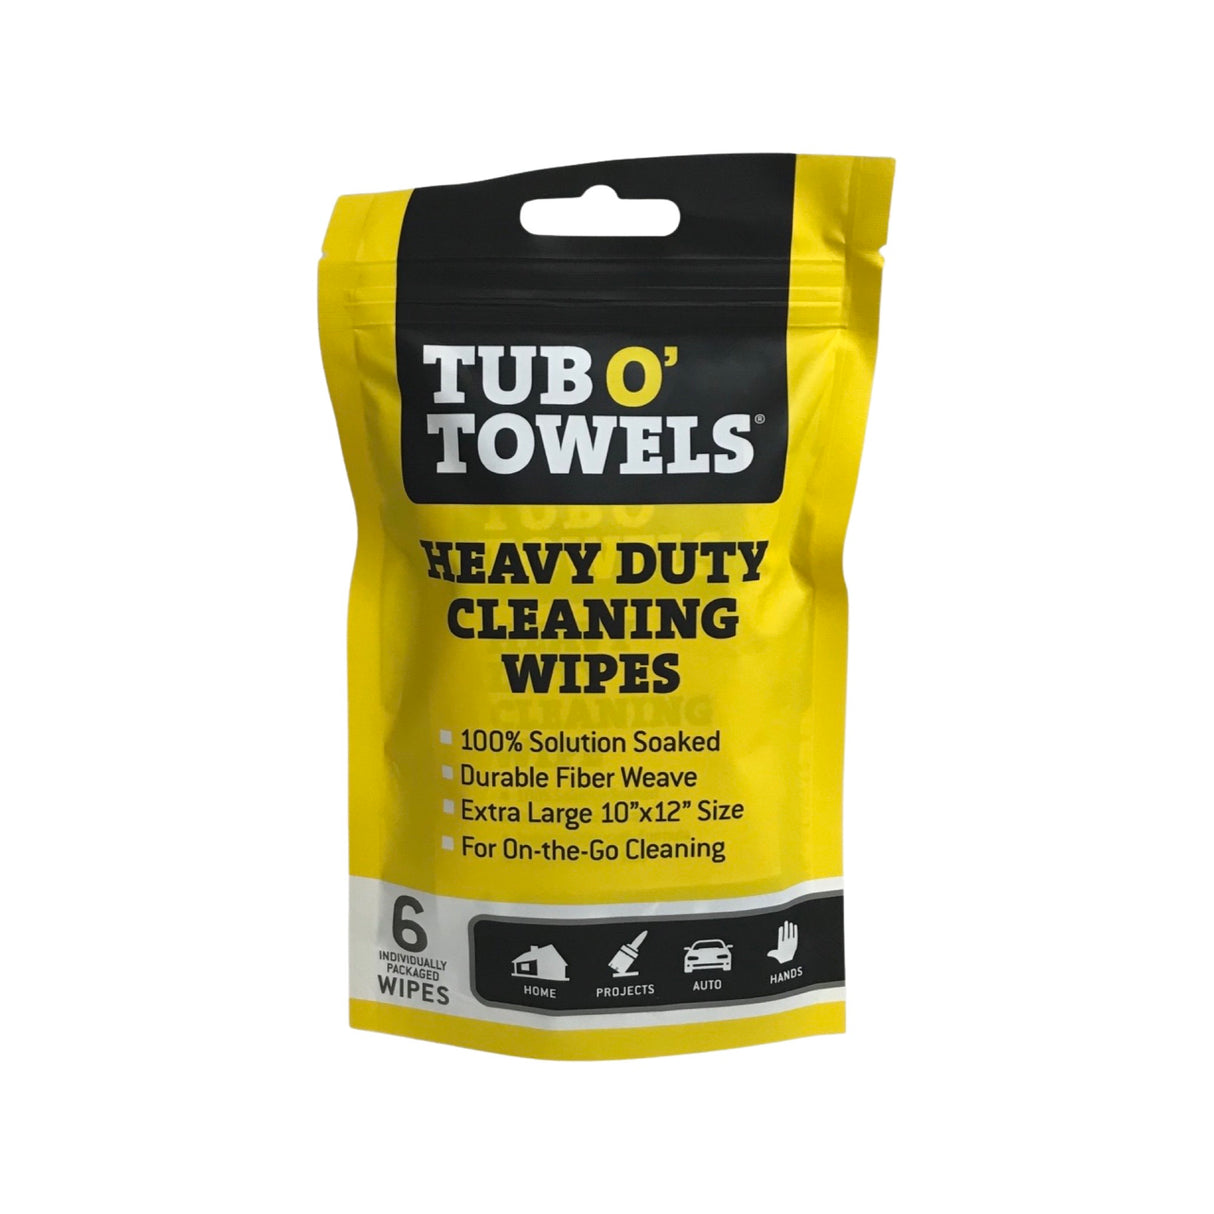 Tub O' Towels TW01-6 - 15 Pack Heavy Duty Multi-Surface Cleaning Wipes - Resealable